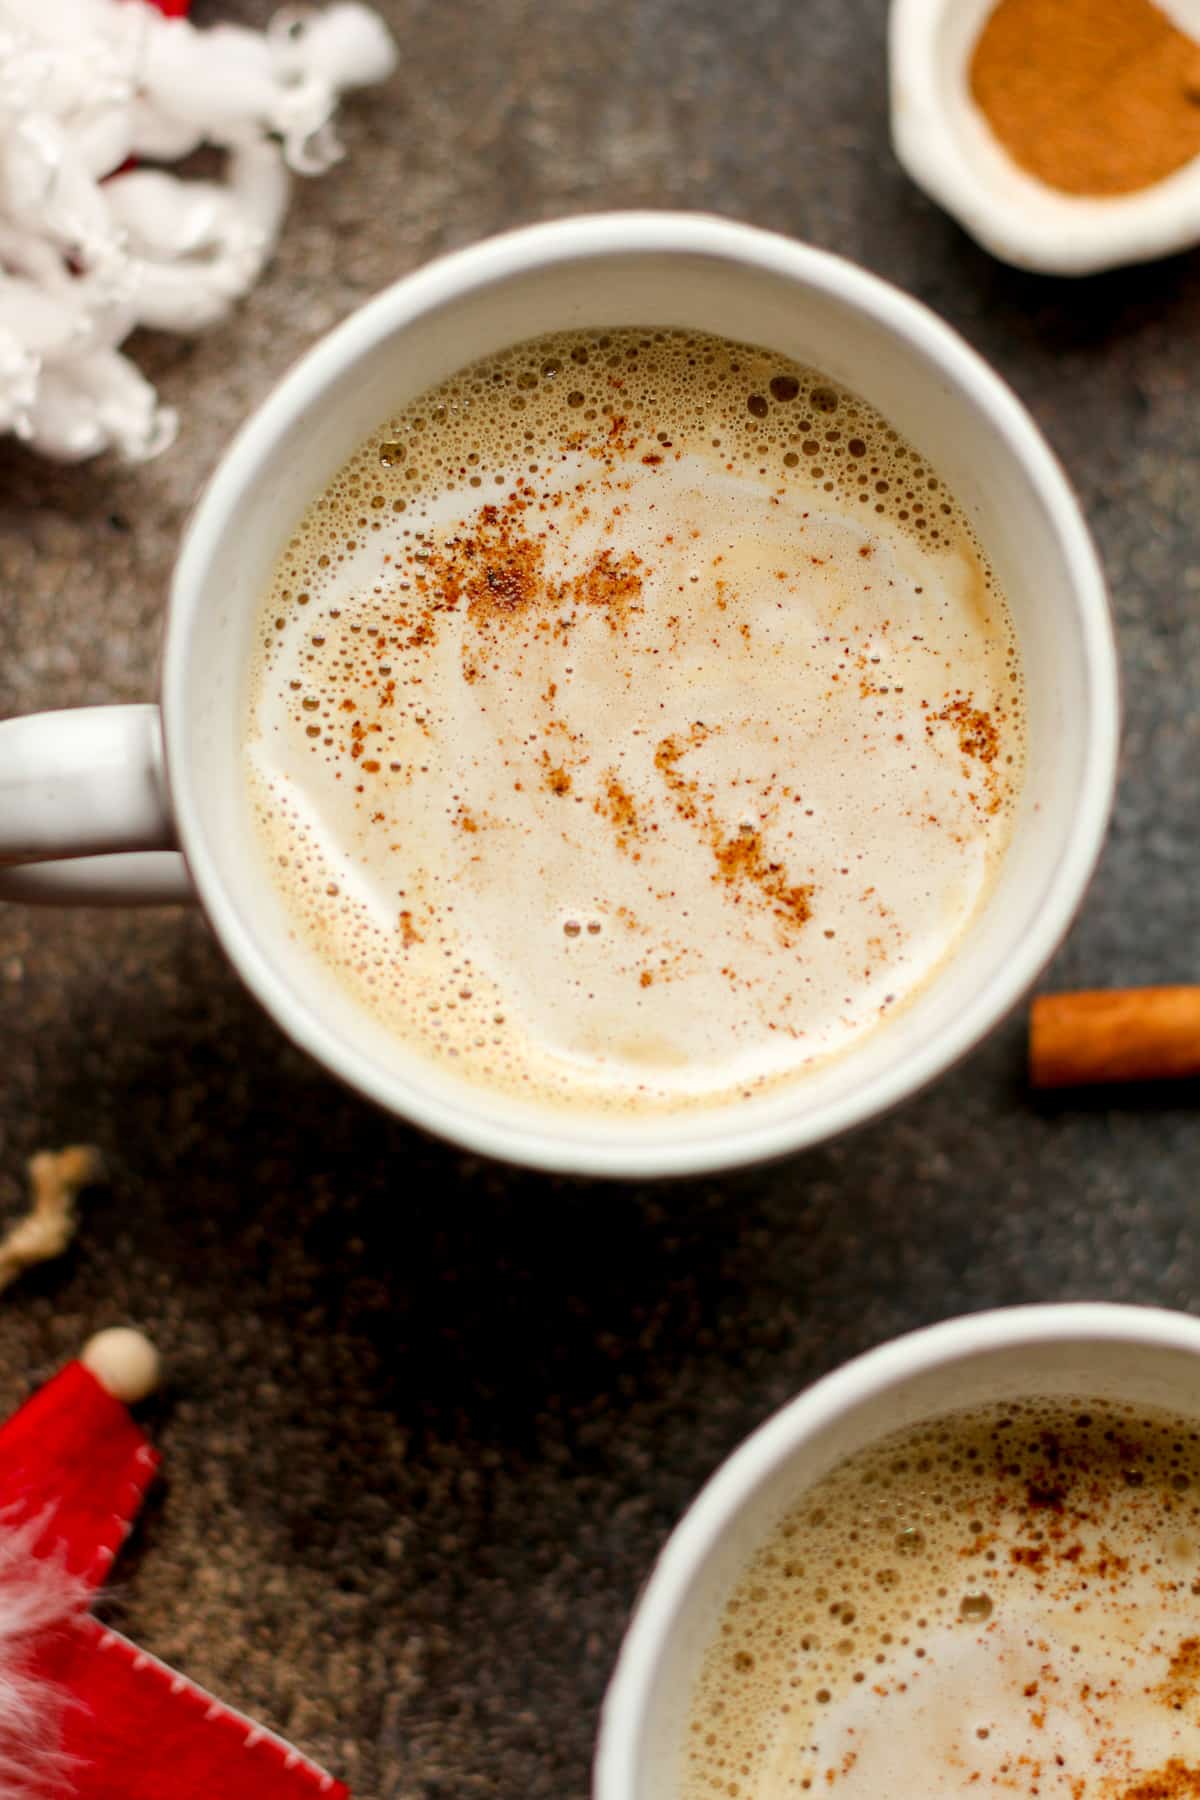 Overhead view of eggnog lattes with cinnamon sticks.